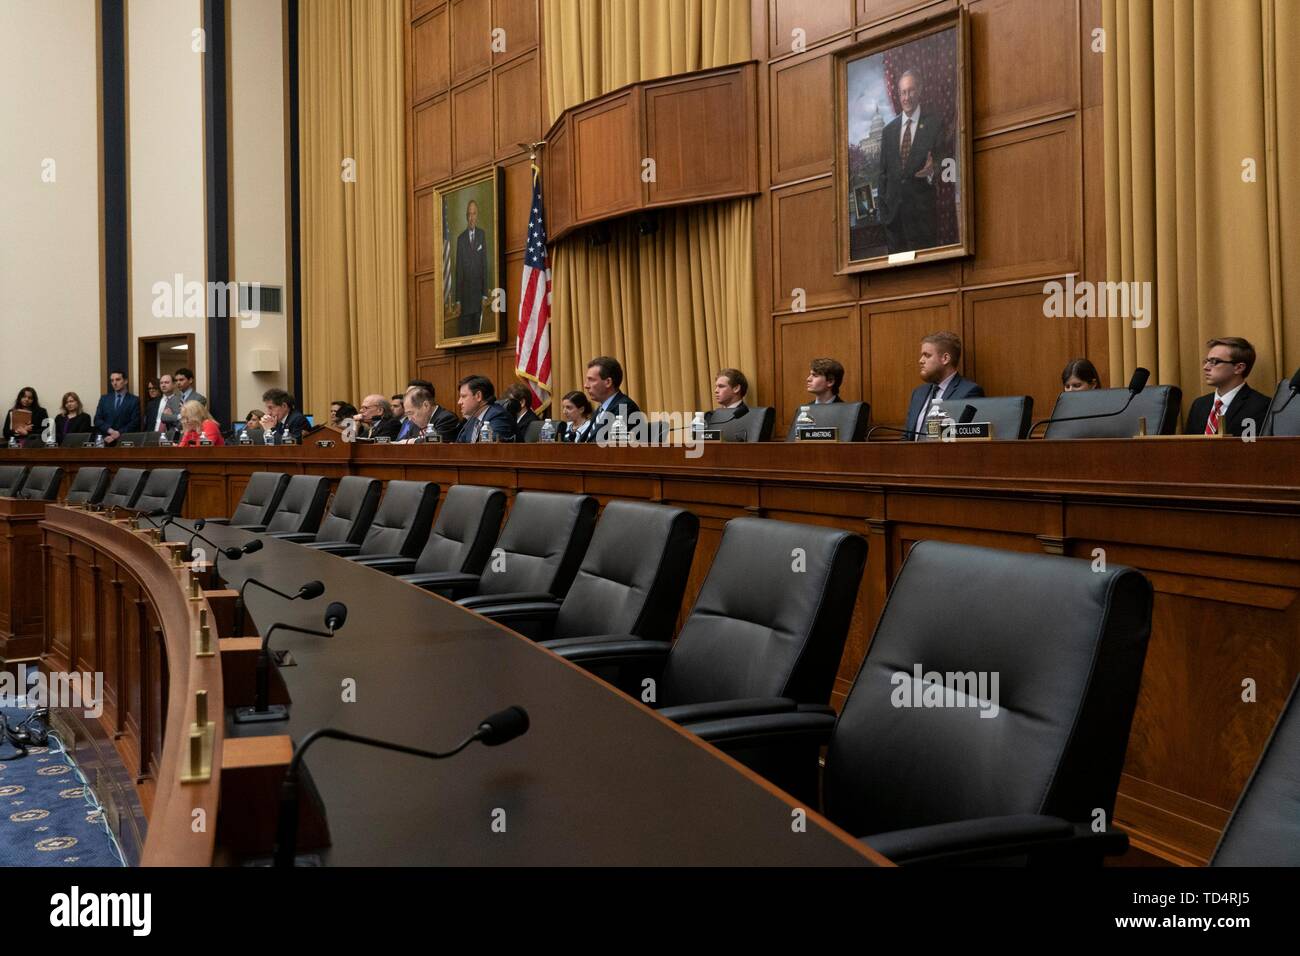 Jon Stewart Criticized The Empty Chairs In The Hearing Room